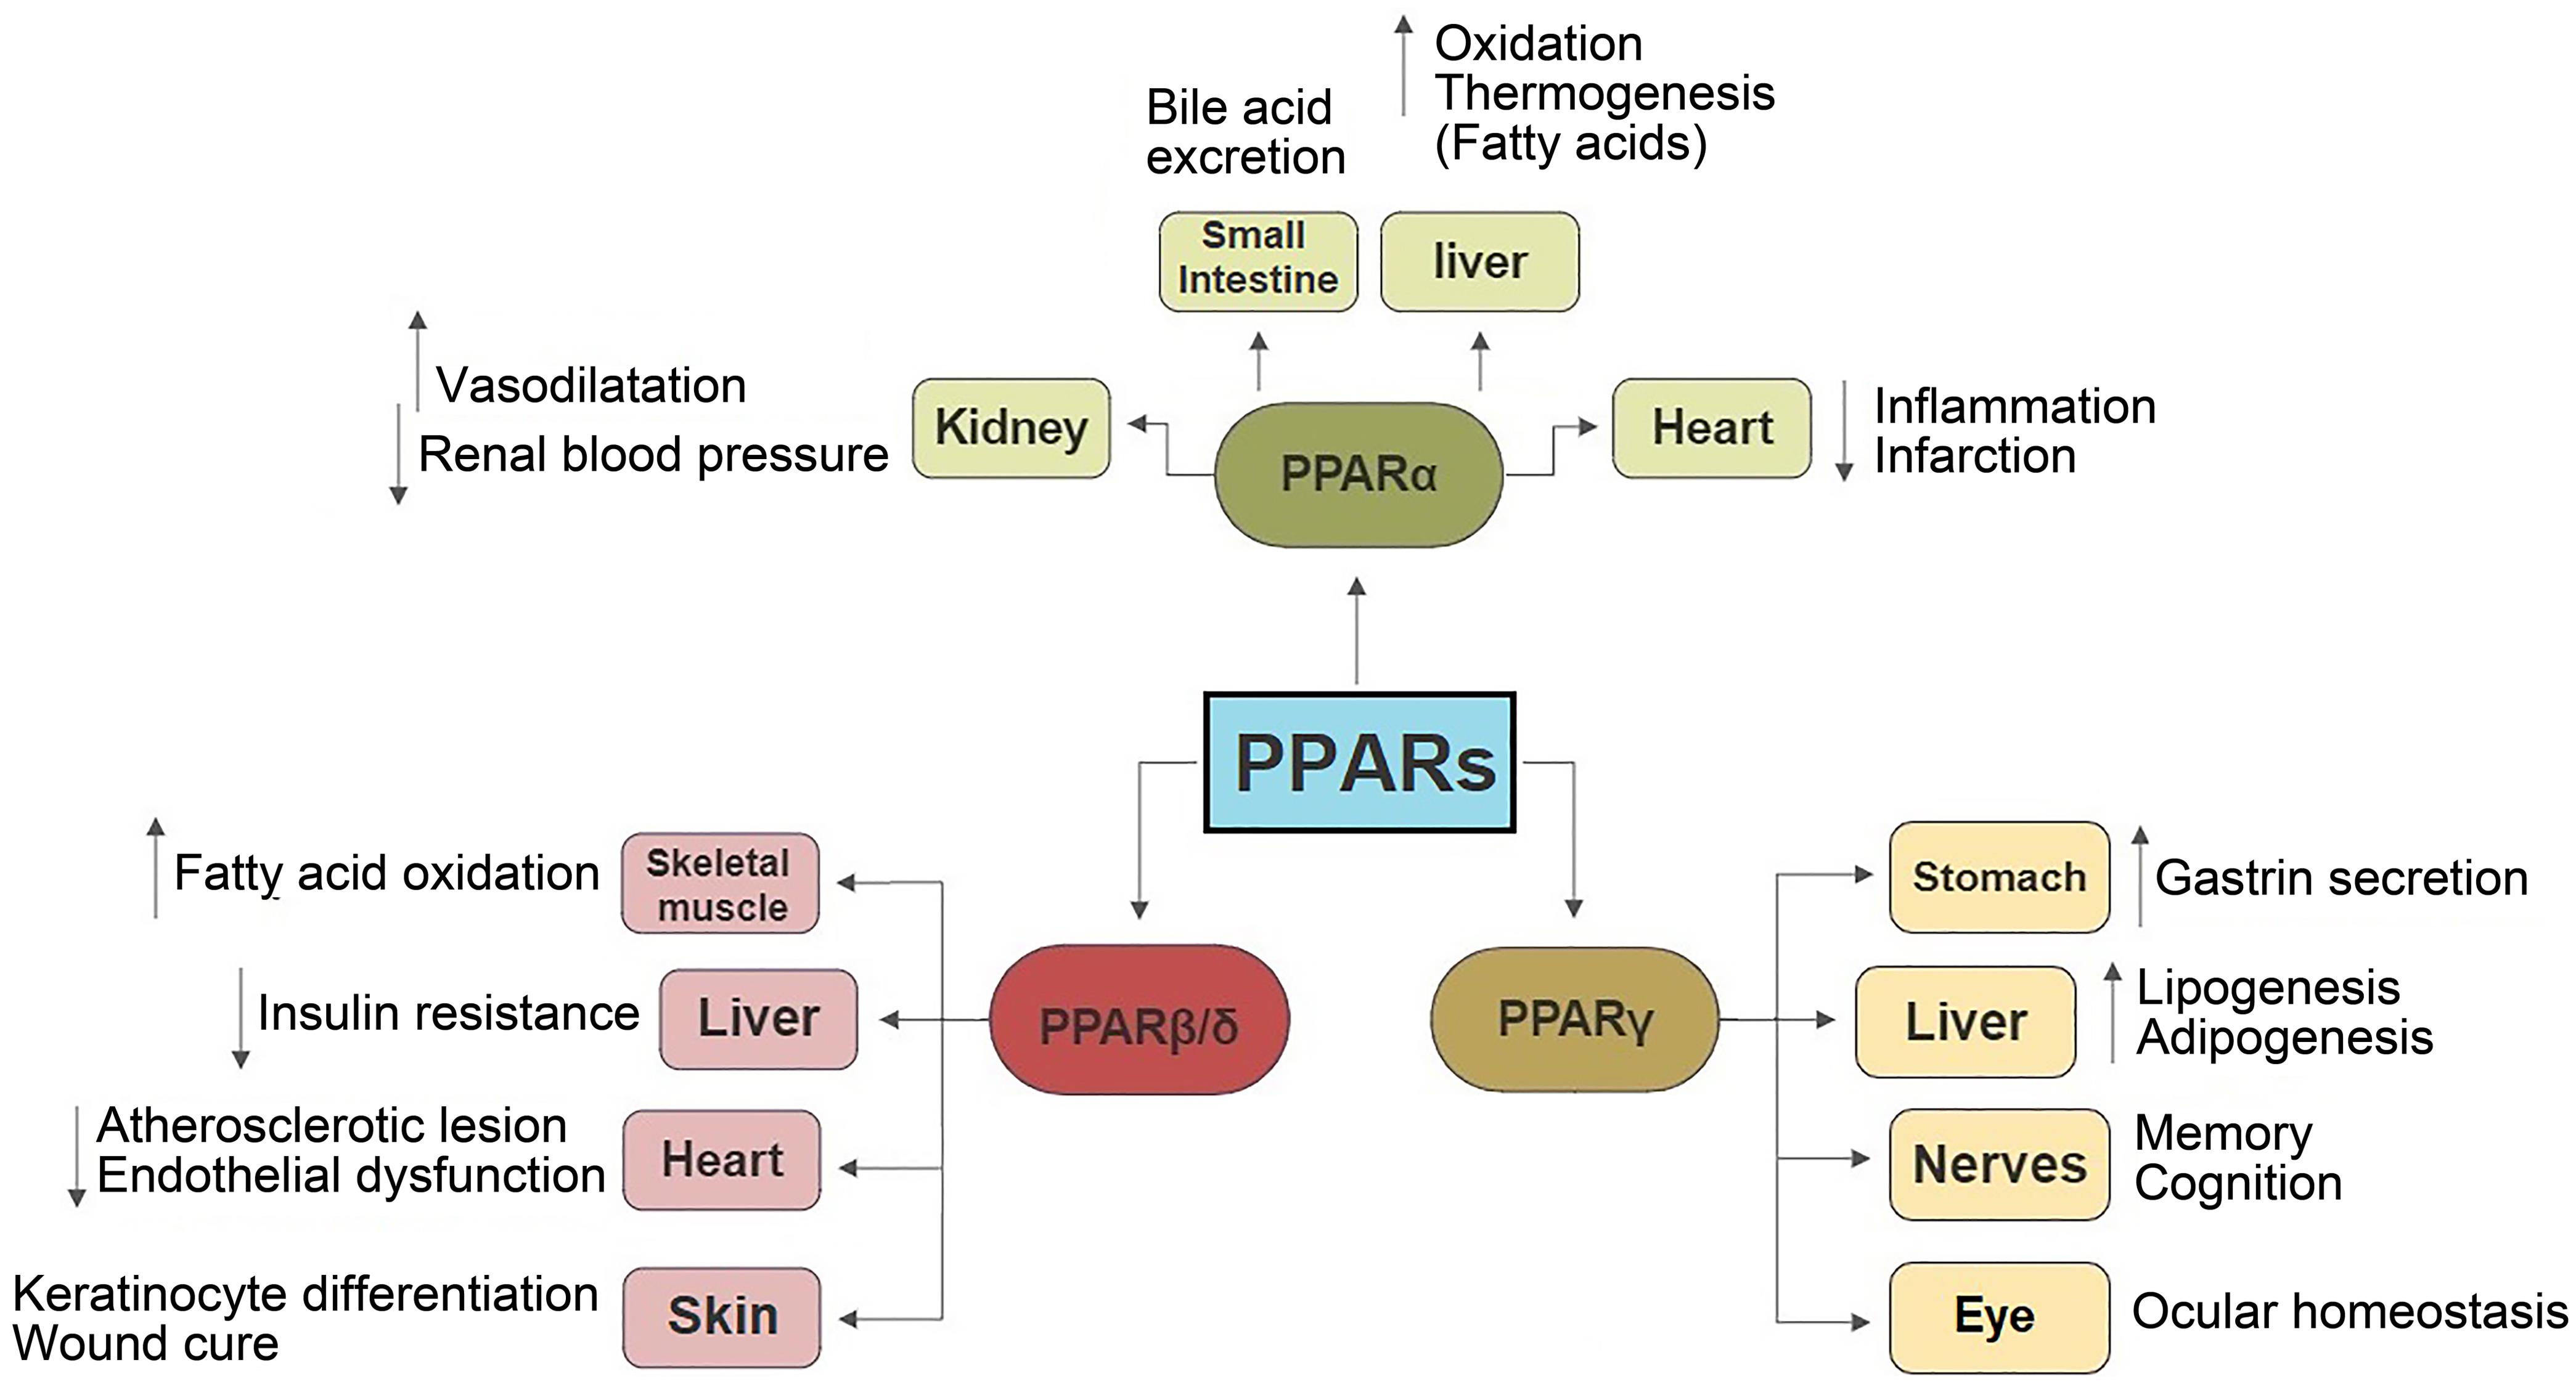 Function of PPARs in different tissues in physiological conditions.